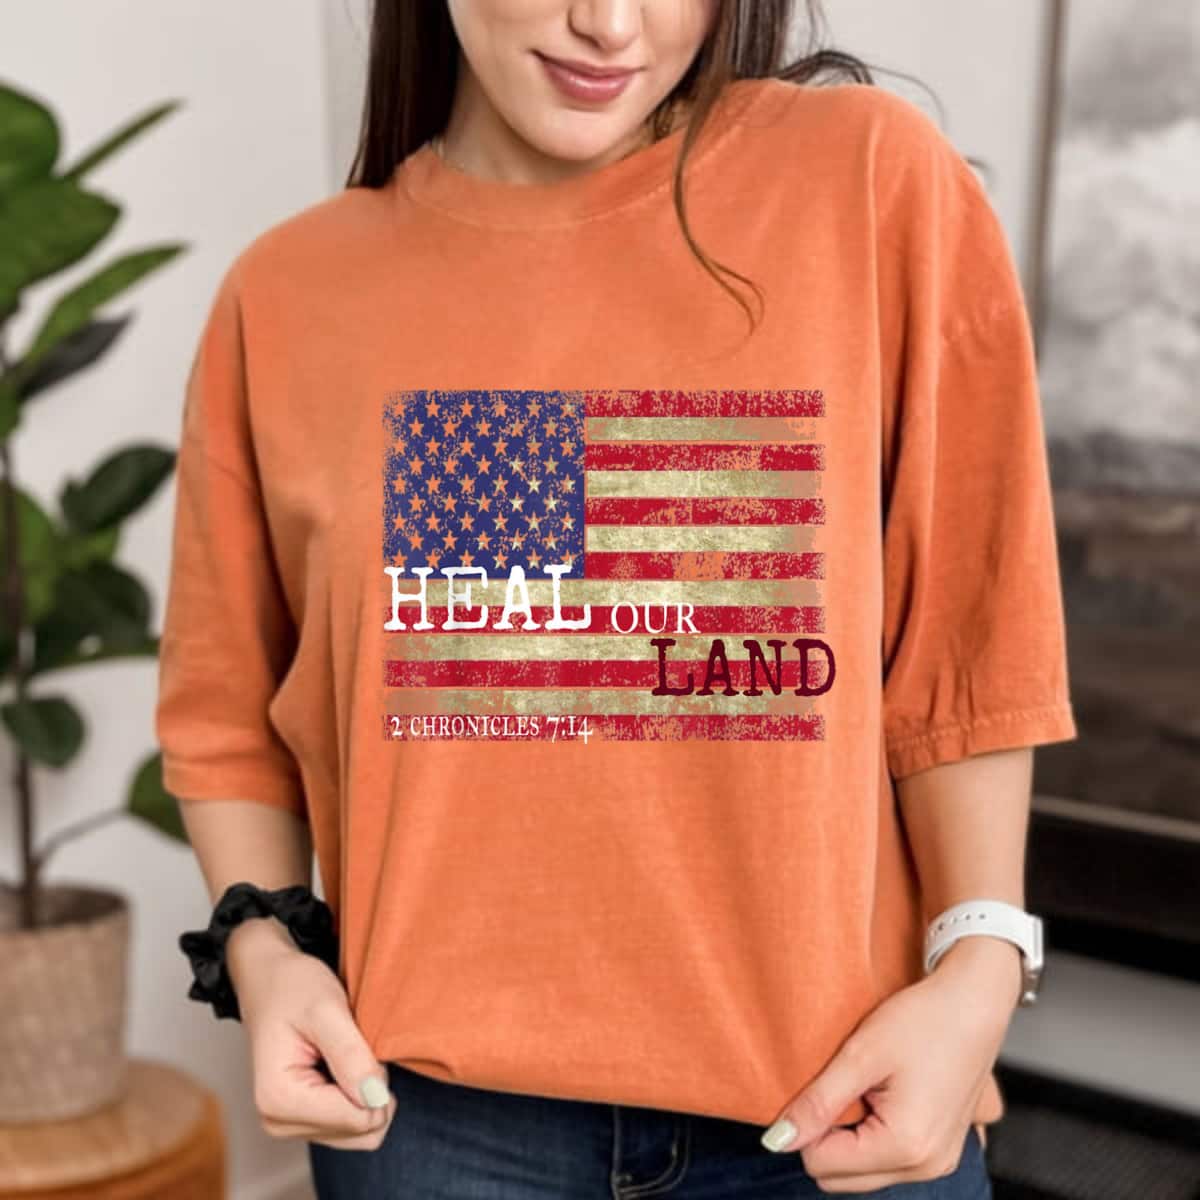 Heal Our Land 2 Chronicles 714 Christian T-Shirt